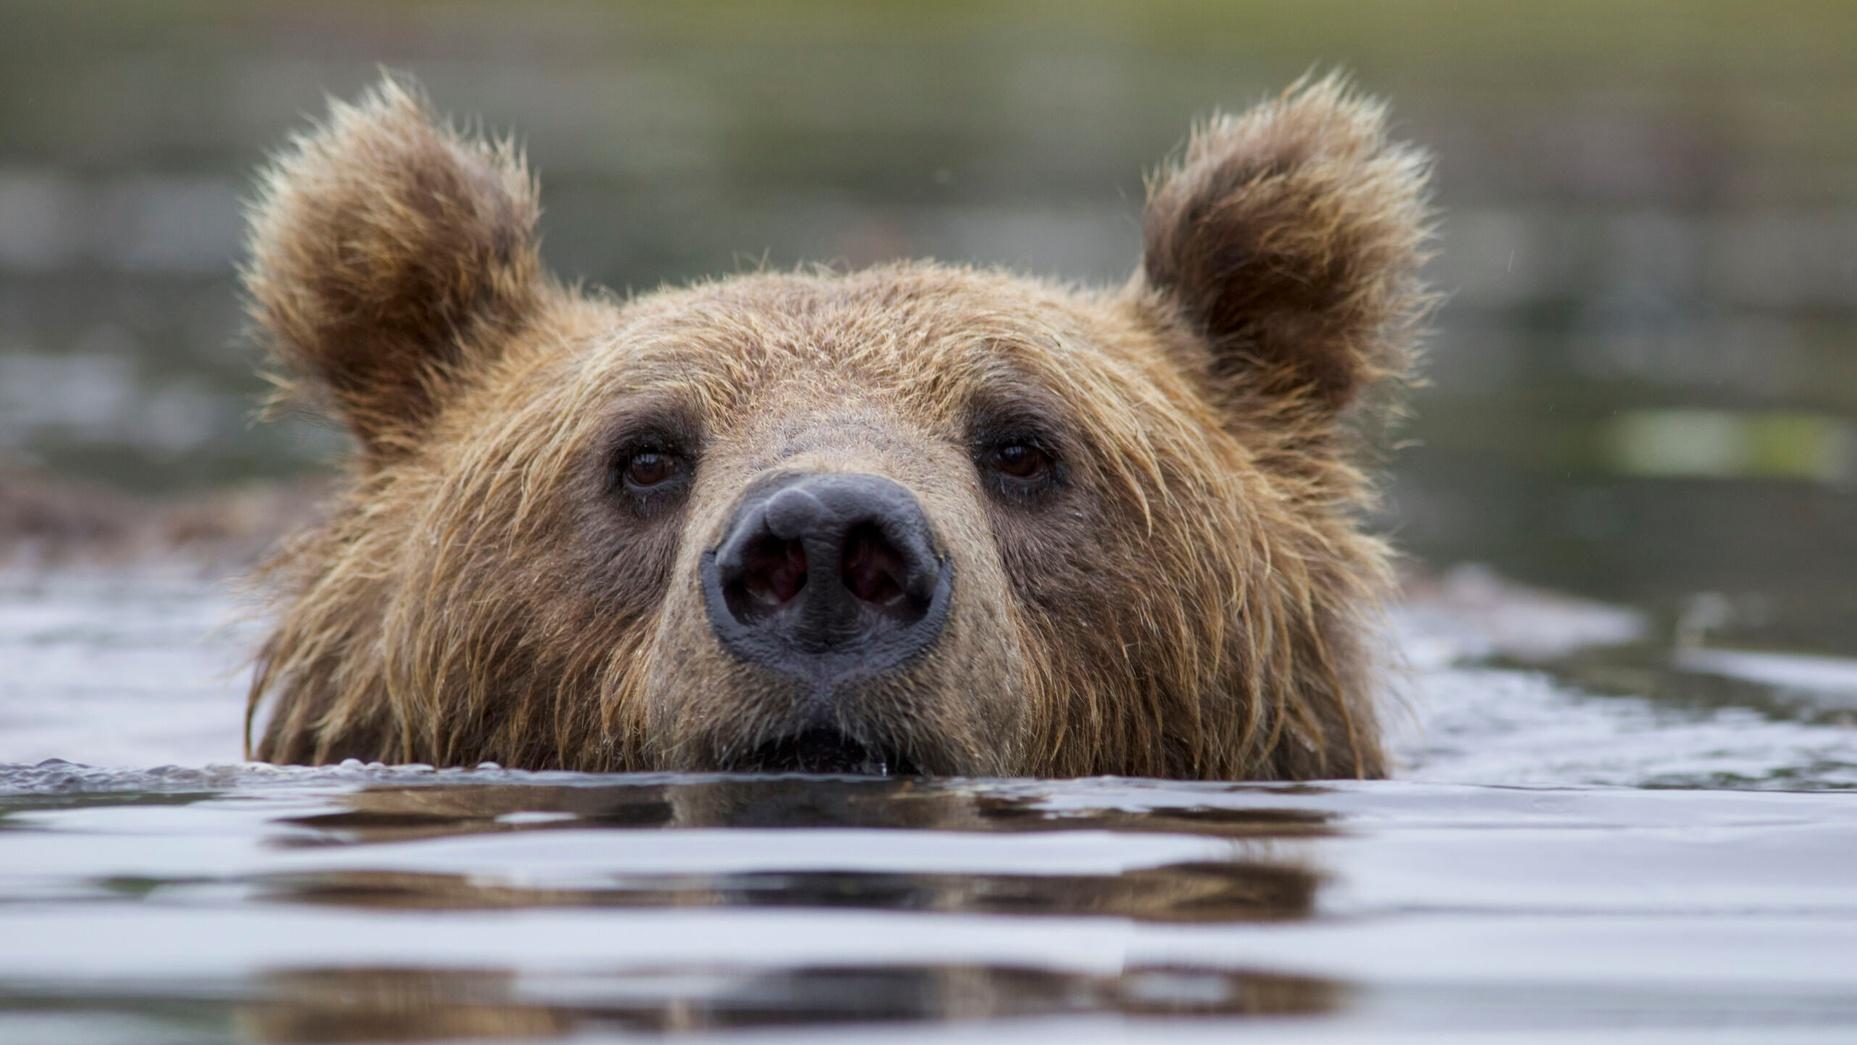 A brown bear pokes their head out from underwater.